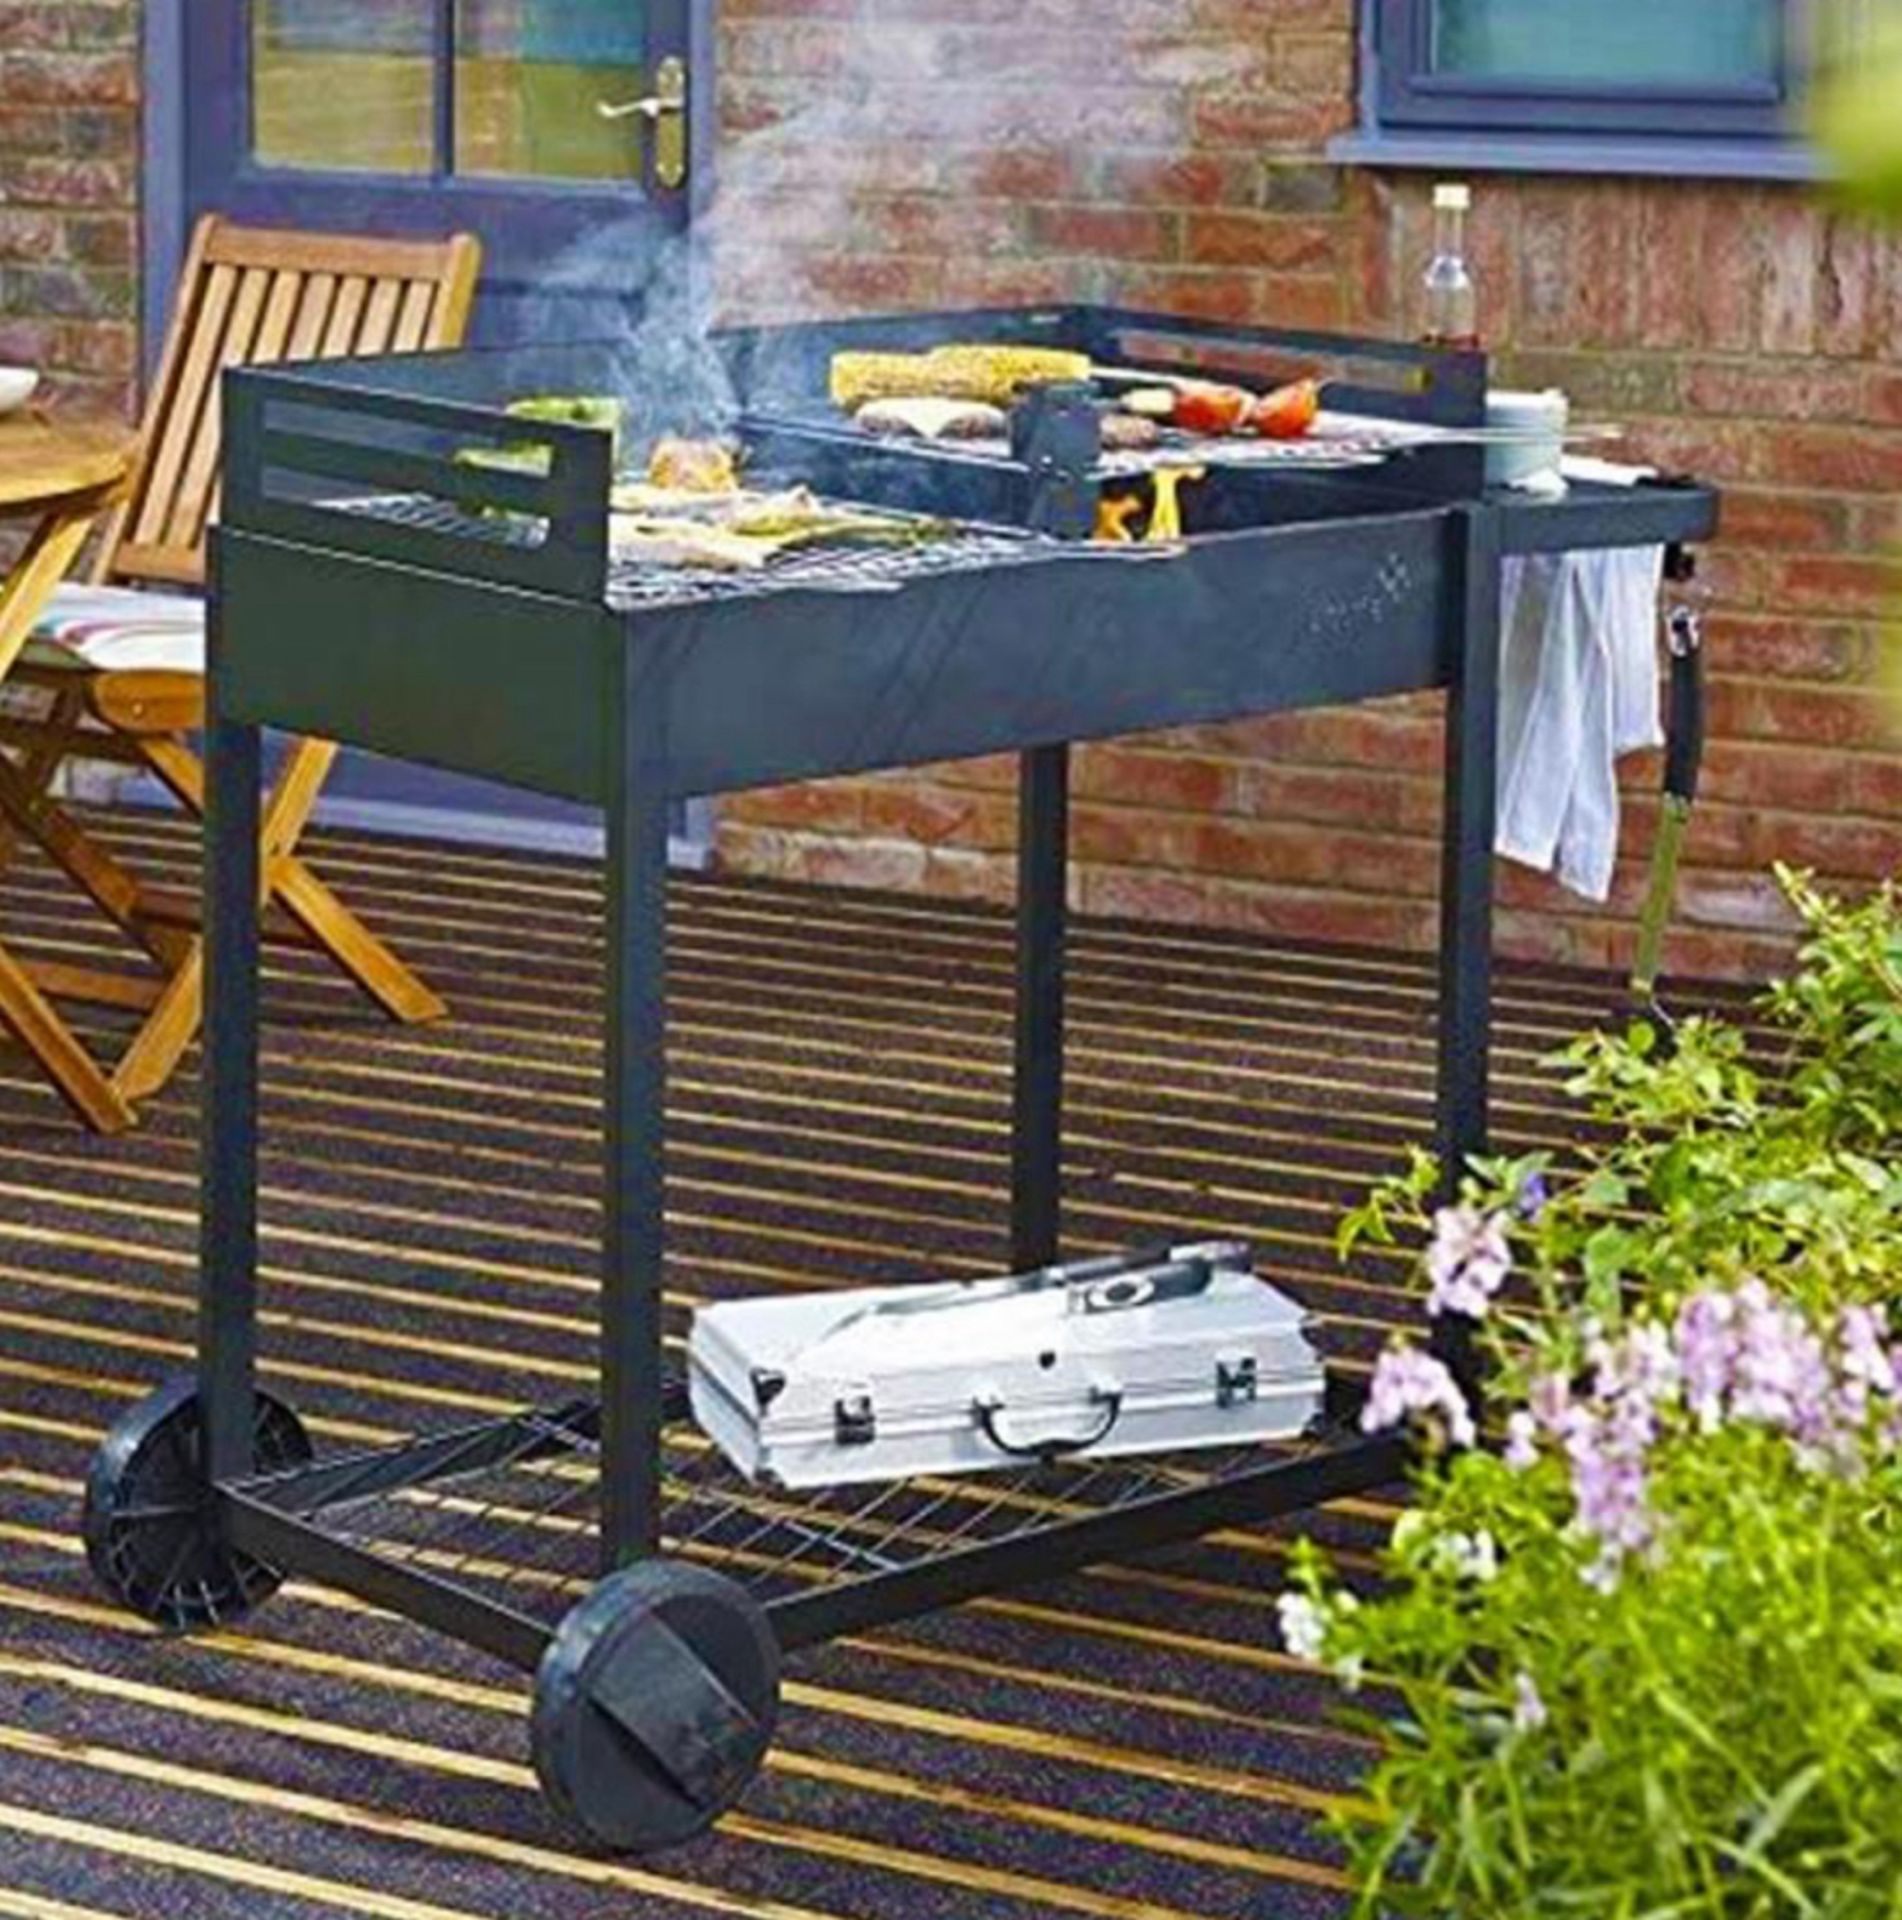 Zelfo BBQ Barbecue Grill with Stands - Brand New & Boxed